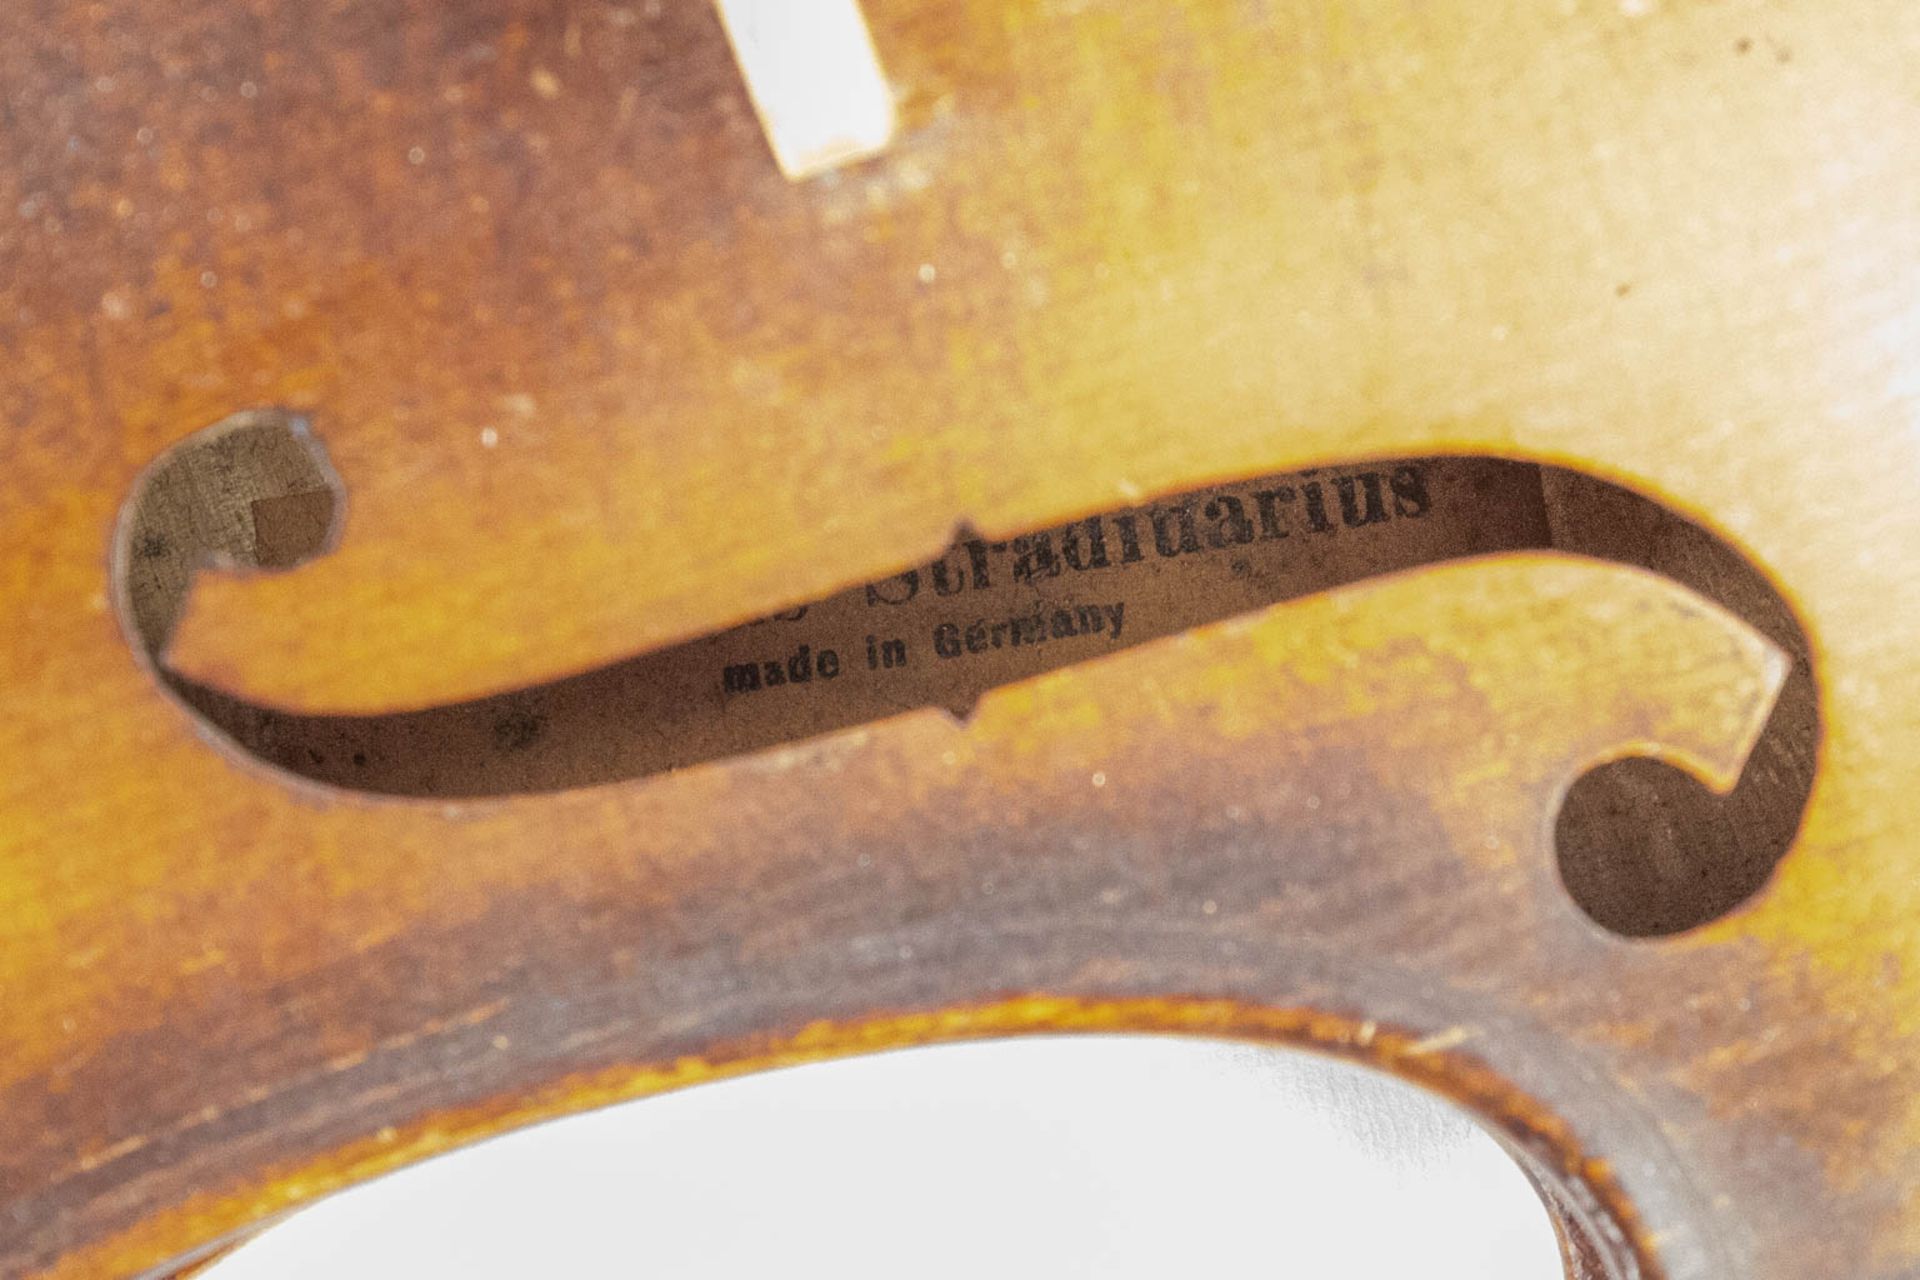 A collection of 3 musical instruments: 2 mandolines and a violin, after a model made by Stradivarius - Image 26 of 56